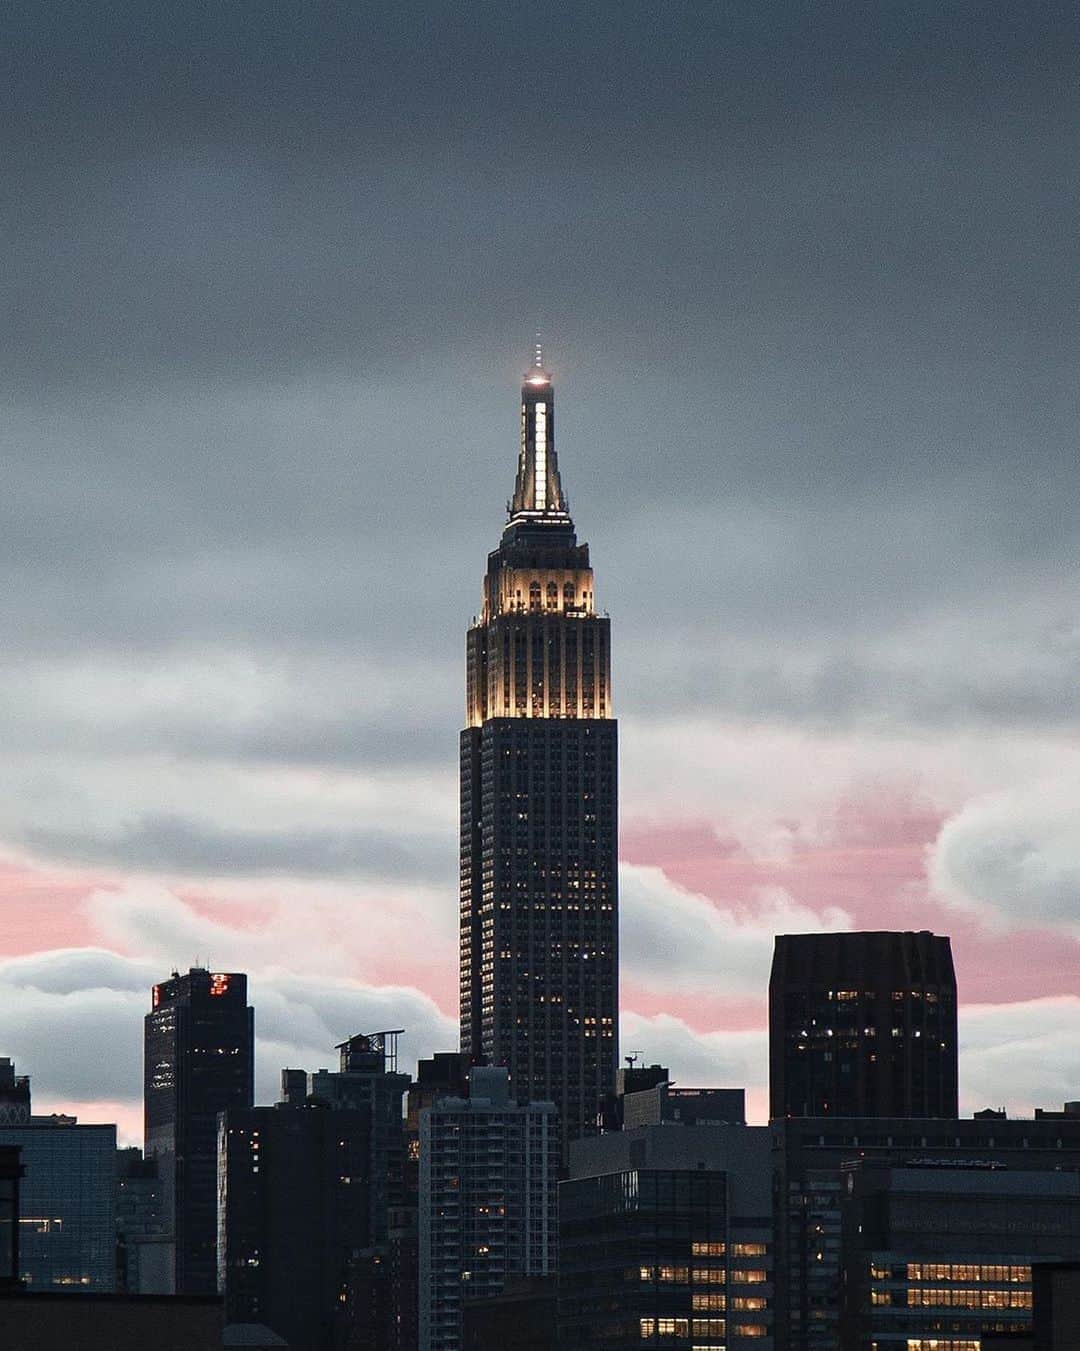 Empire State Buildingさんのインスタグラム写真 - (Empire State BuildingInstagram)「#GIVEAWAY: Closest thing to heaven in this city… might just be your couch 😉 ⠀⠀⠀⠀⠀⠀⠀⠀⠀ LIKE THIS POST to enter our giveaway of 100 $20 free codes for one of our most iconic moments, the film: “An Affair to Remember”! #ESBMovieNight ⠀⠀⠀⠀⠀⠀⠀⠀⠀ HOW TO ENTER: 1. Follow the @empirestatebldg on Instagram (we check!) ⭐️ 2. LIKE THIS POST ❤️ 3. Comment below tagging a friend 👇 ⠀⠀⠀⠀⠀⠀⠀⠀⠀ Unlimited Entries, contest ends 11:59PM tonight! One handle/tag per comment, each comment must be unique. Five lucky winners will also receive an exclusive #EmpireStateBuilding movie pack! Click link in bio for rules. ⠀⠀⠀⠀⠀⠀⠀⠀⠀ 📷: @damien_do #EmpireStateBuilding   ⠀ ⠀⠀⠀⠀⠀⠀⠀⠀⠀⠀⠀⠀⠀⠀⠀⠀⠀⠀⠀⠀⠀⠀⠀⠀⠀⠀⠀⠀⠀⠀⠀⠀⠀⠀ ⠀⠀⠀⠀⠀⠀⠀⠀⠀⠀⠀⠀⠀⠀⠀⠀⠀⠀⠀⠀⠀⠀⠀⠀⠀⠀⠀⠀⠀⠀⠀⠀⠀⠀⠀⠀⠀⠀⠀⠀⠀⠀⠀⠀⠀⠀⠀⠀⠀⠀⠀⠀⠀⠀⠀⠀⠀⠀⠀⠀⠀⠀⠀⠀⠀⠀⠀⠀⠀⠀⠀⠀⠀⠀⠀⠀⠀⠀⠀⠀⠀⠀⠀⠀⠀⠀⠀⠀⠀⠀⠀⠀⠀⠀⠀⠀⠀⠀⠀⠀⠀⠀⠀⠀⠀⠀⠀⠀⠀⠀⠀⠀⠀⠀⠀⠀⠀⠀⠀⠀⠀⠀⠀⠀⠀⠀⠀⠀⠀⠀⠀⠀⠀⠀⠀⠀⠀⠀⠀⠀⠀⠀⠀⠀⠀⠀⠀⠀⠀⠀⠀⠀⠀⠀⠀⠀⠀⠀⠀⠀⠀⠀⠀⠀⠀⠀⠀⠀⠀⠀⠀⠀⠀⠀⠀⠀⠀⠀⠀⠀⠀⠀⠀⠀⠀⠀⠀⠀⠀⠀⠀⠀⠀⠀⠀⠀⠀⠀⠀⠀⠀⠀⠀⠀⠀⠀⠀⠀⠀⠀⠀⠀⠀⠀⠀⠀ This contest/giveaway is in no way sponsored, endorsed or administered, or associated with Instagram. This giveaway is sponsored by @empirestatebldg, @vudufans & @disney. The contest will run until 11:59PM EST 8/14/20. Entrants must follow @empirestatebldg. Giveaway is open only to residents 18+ years of age, of the 50 United States and District of Columbia. Tap bio link for official rules. A Vudu enabled device and account required for digital viewing. Watch An Affair to Remember on Digital download. © 2020 20th Century Studios」8月15日 1時05分 - empirestatebldg